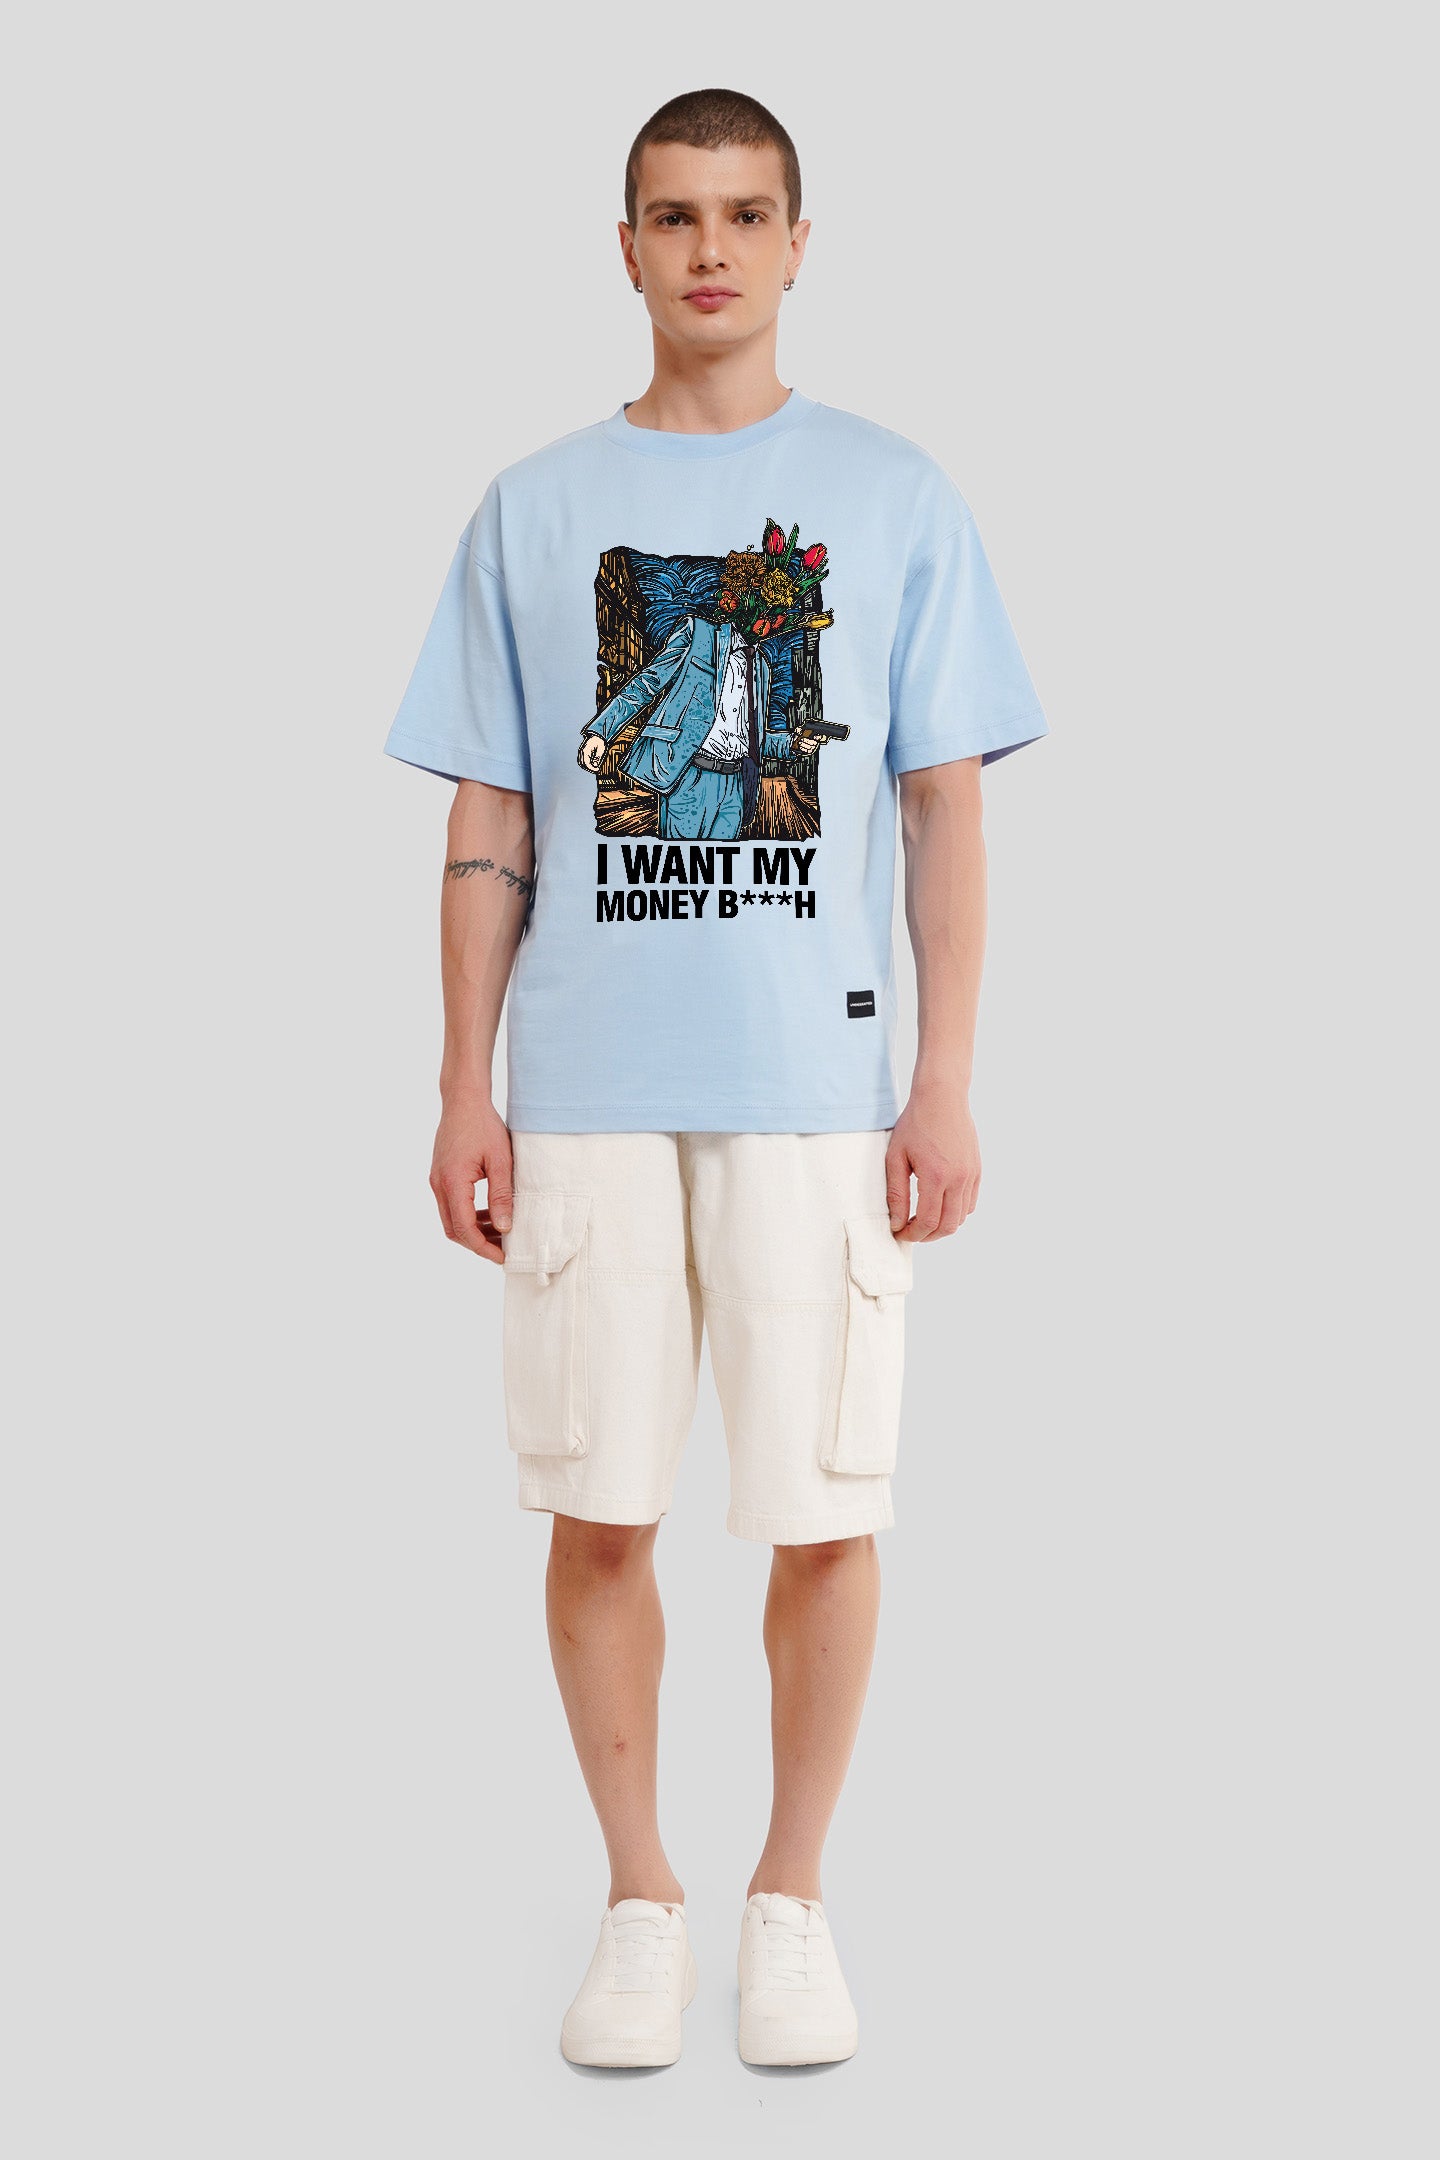 I Want My Money Powder Blue Printed T Shirt Men Oversized Fit With Front Design Pic 1